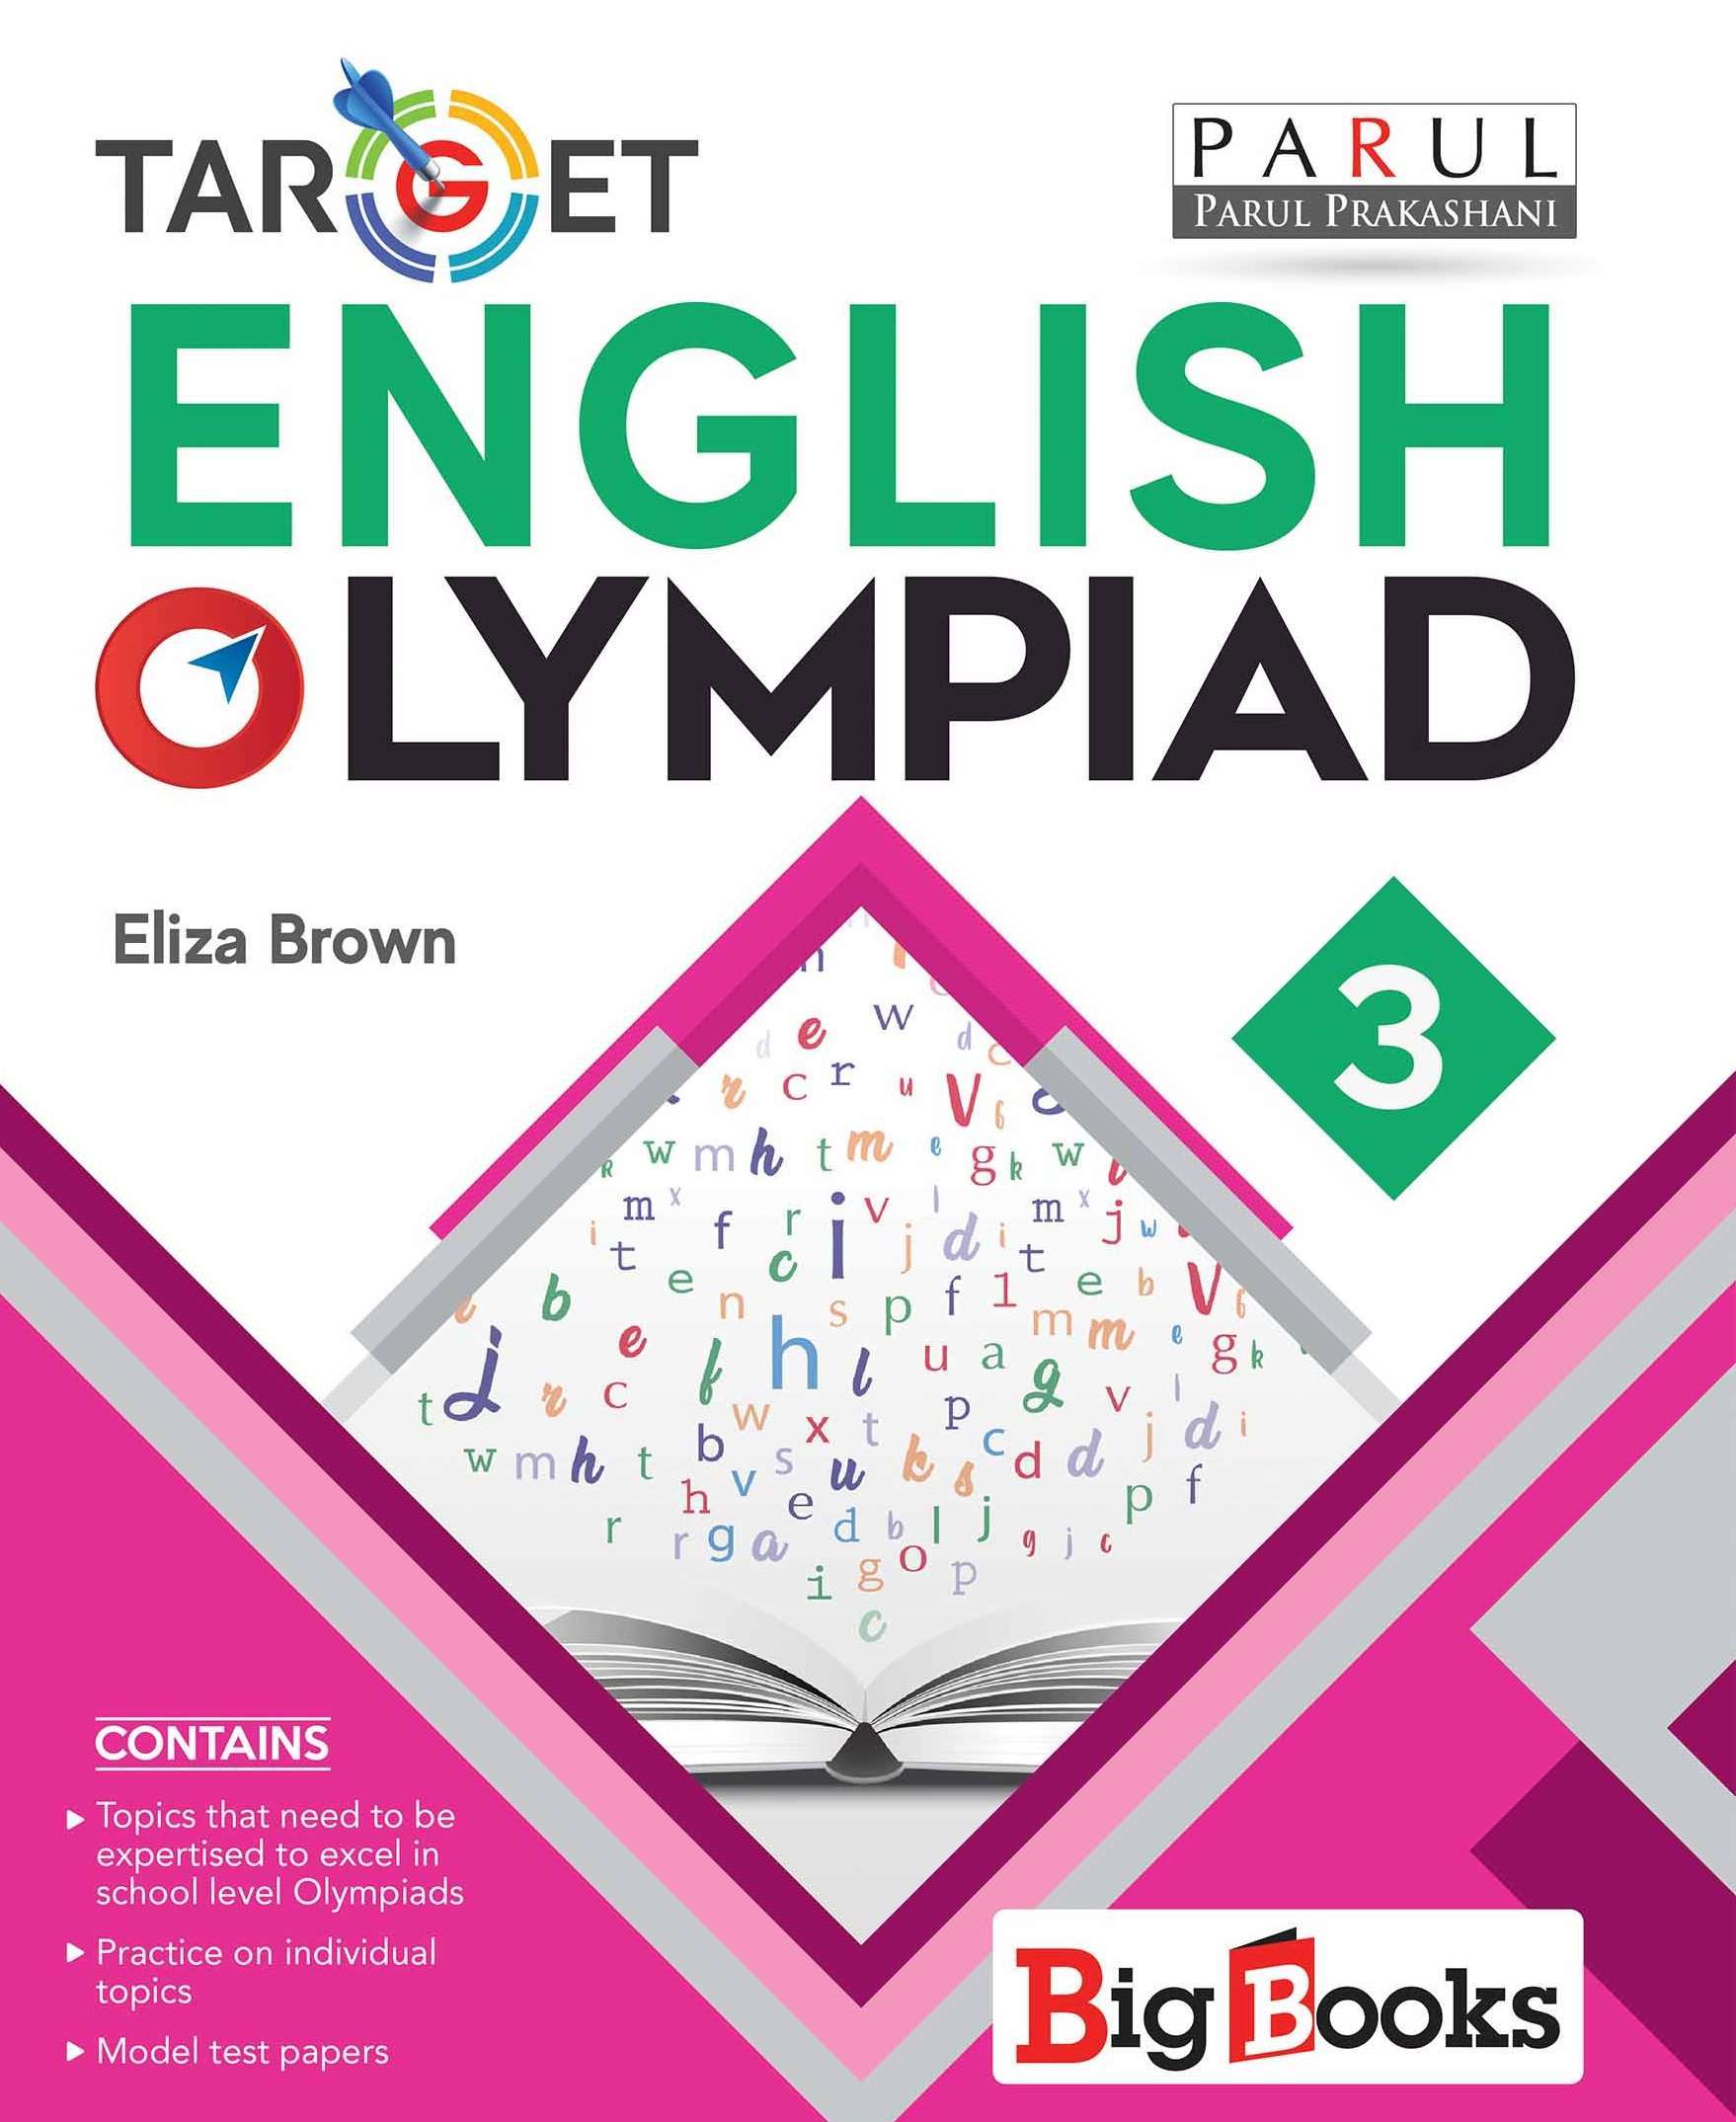 Buy English Olympiad book for 3